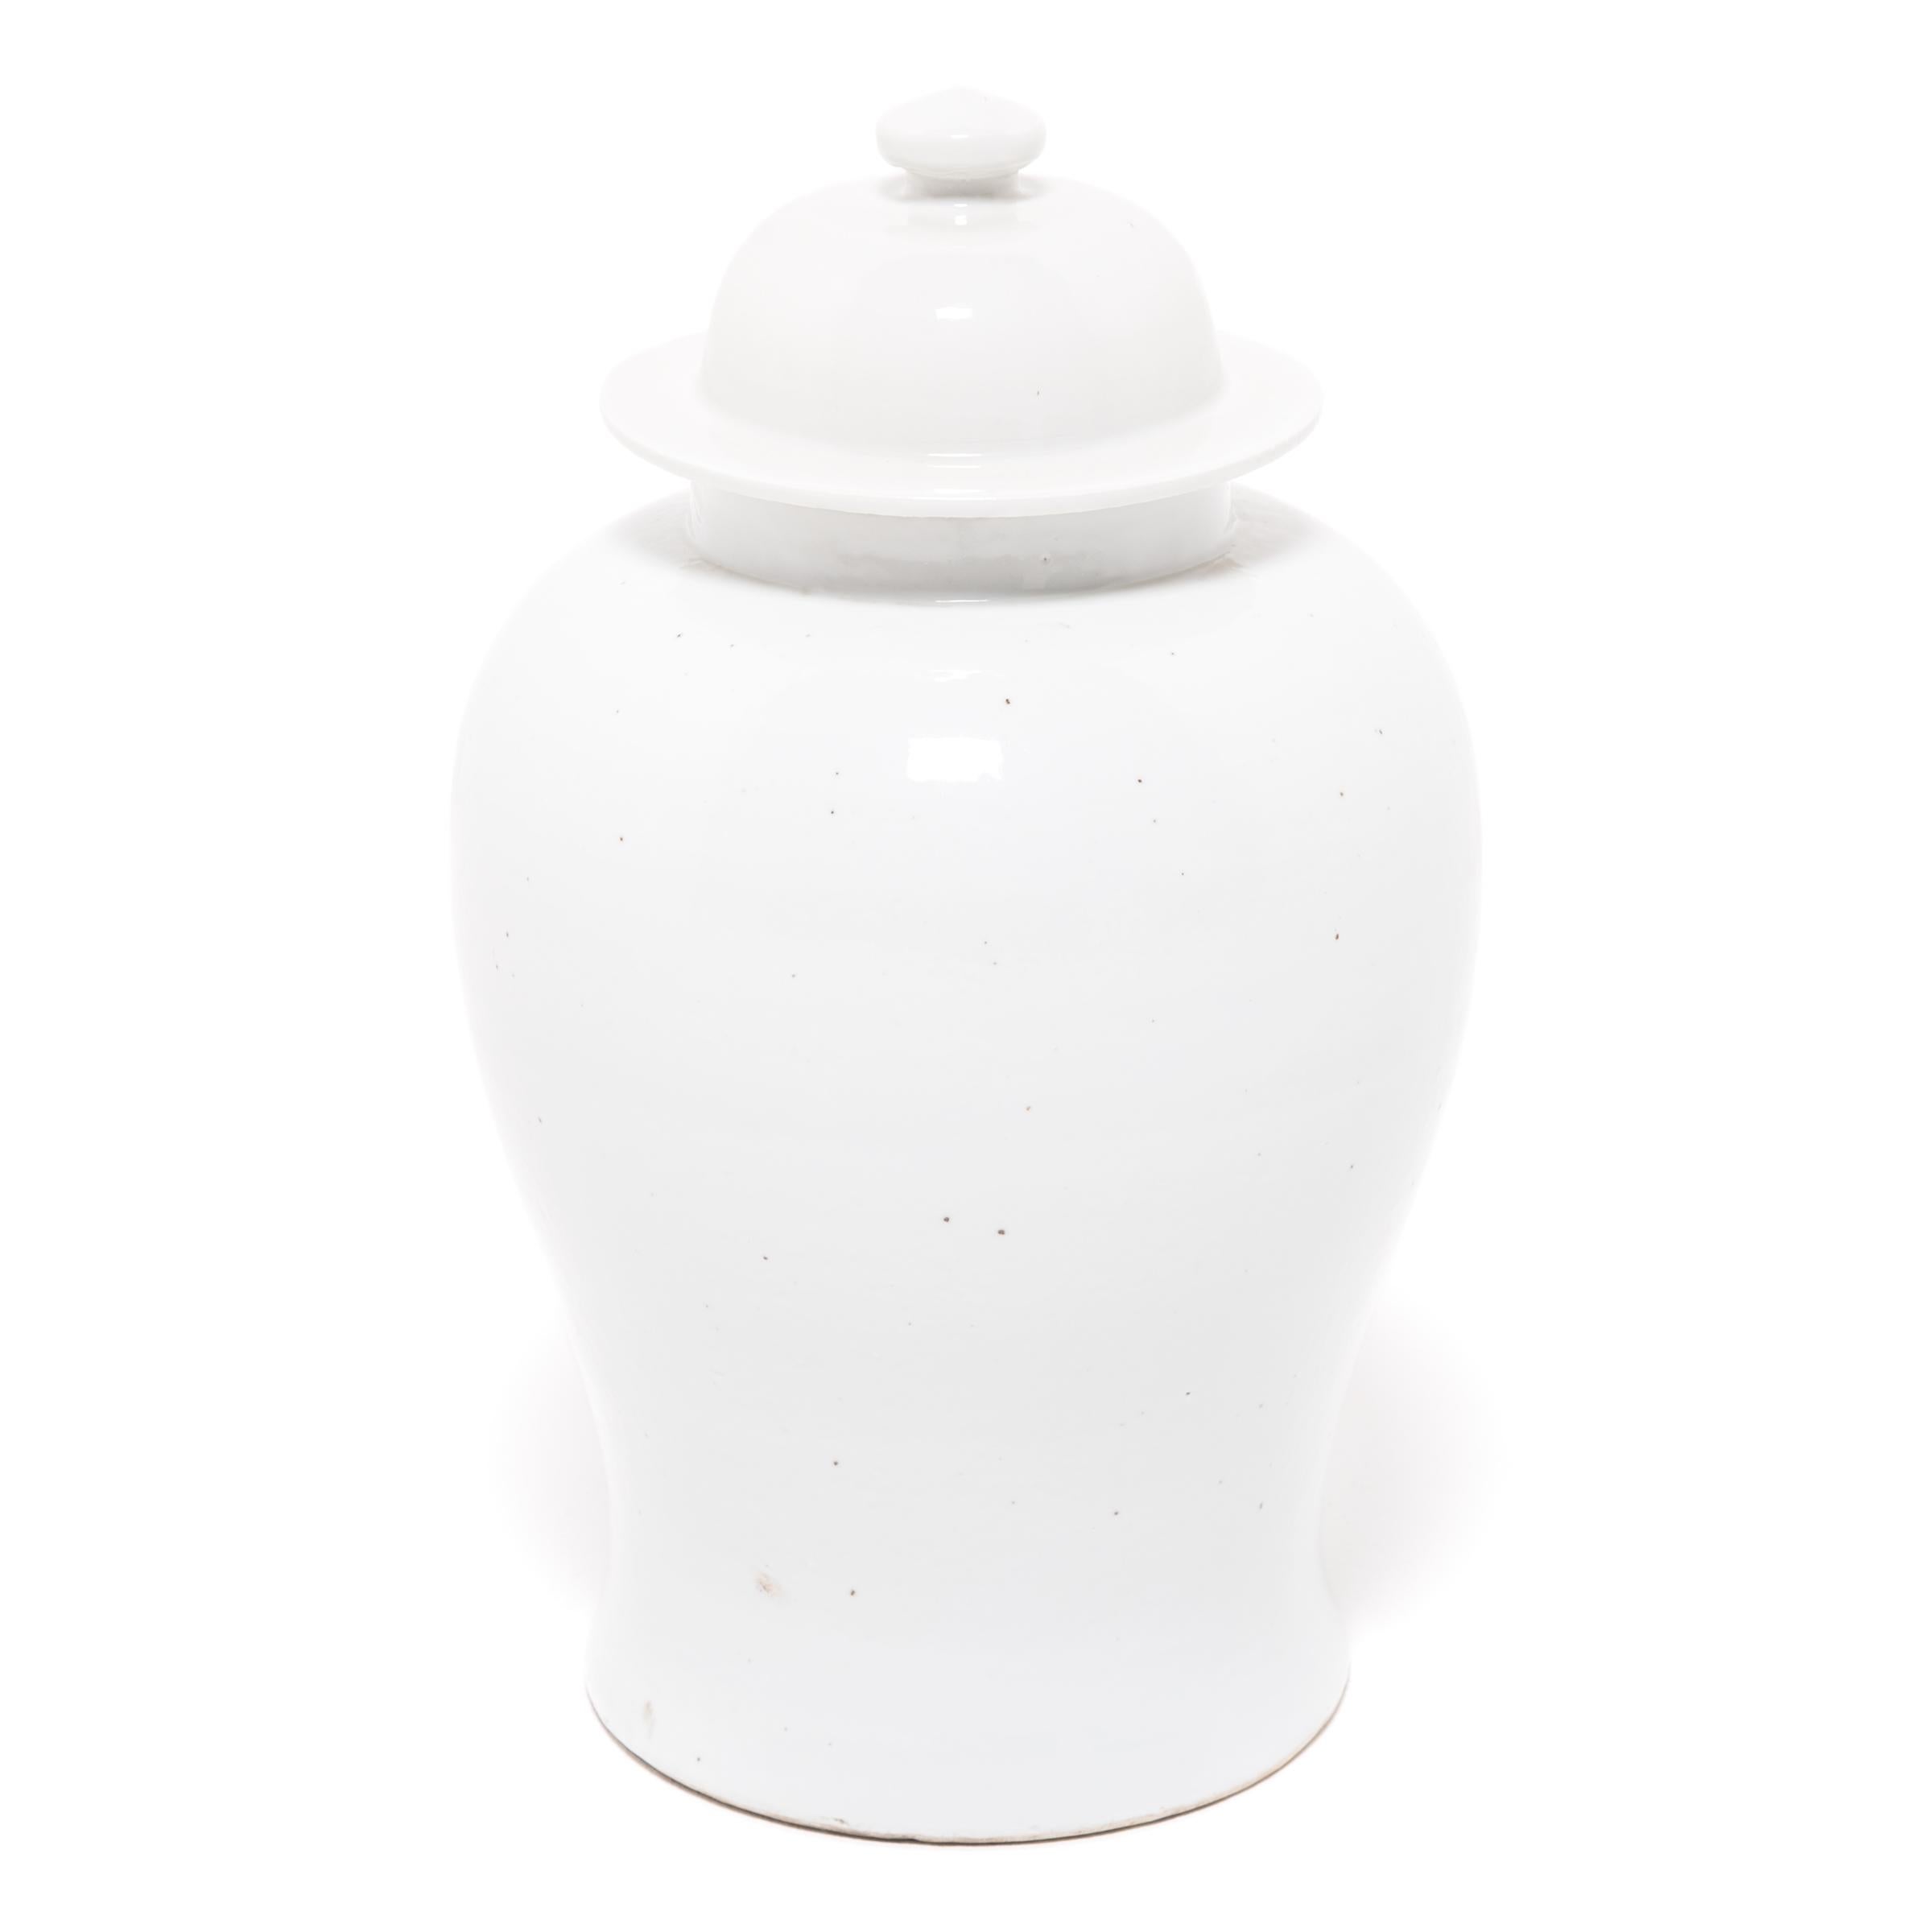 Defined by its rounded body, high shoulders and domed lid, the time-honored look of the Chinese baluster jar takes on a streamlined look in this contemporary interpretation created in Jiangxi province. Once elaborately decorated, this modern take is